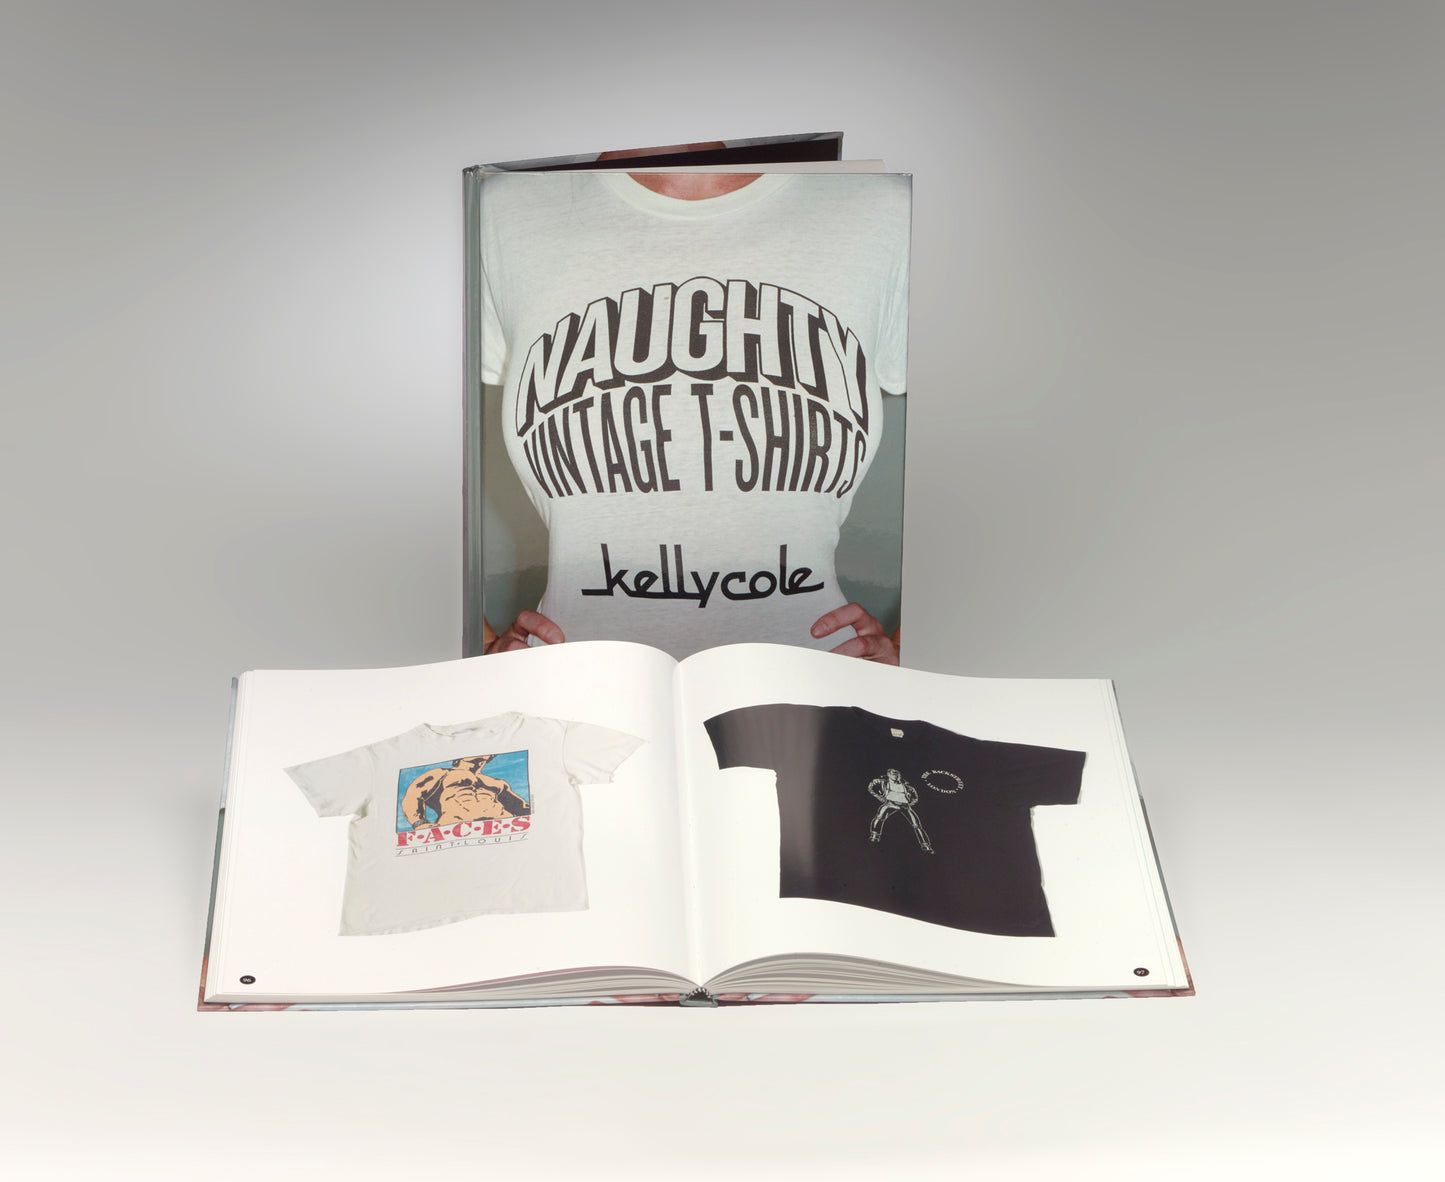 Naughty Vintage T-Shirts Book